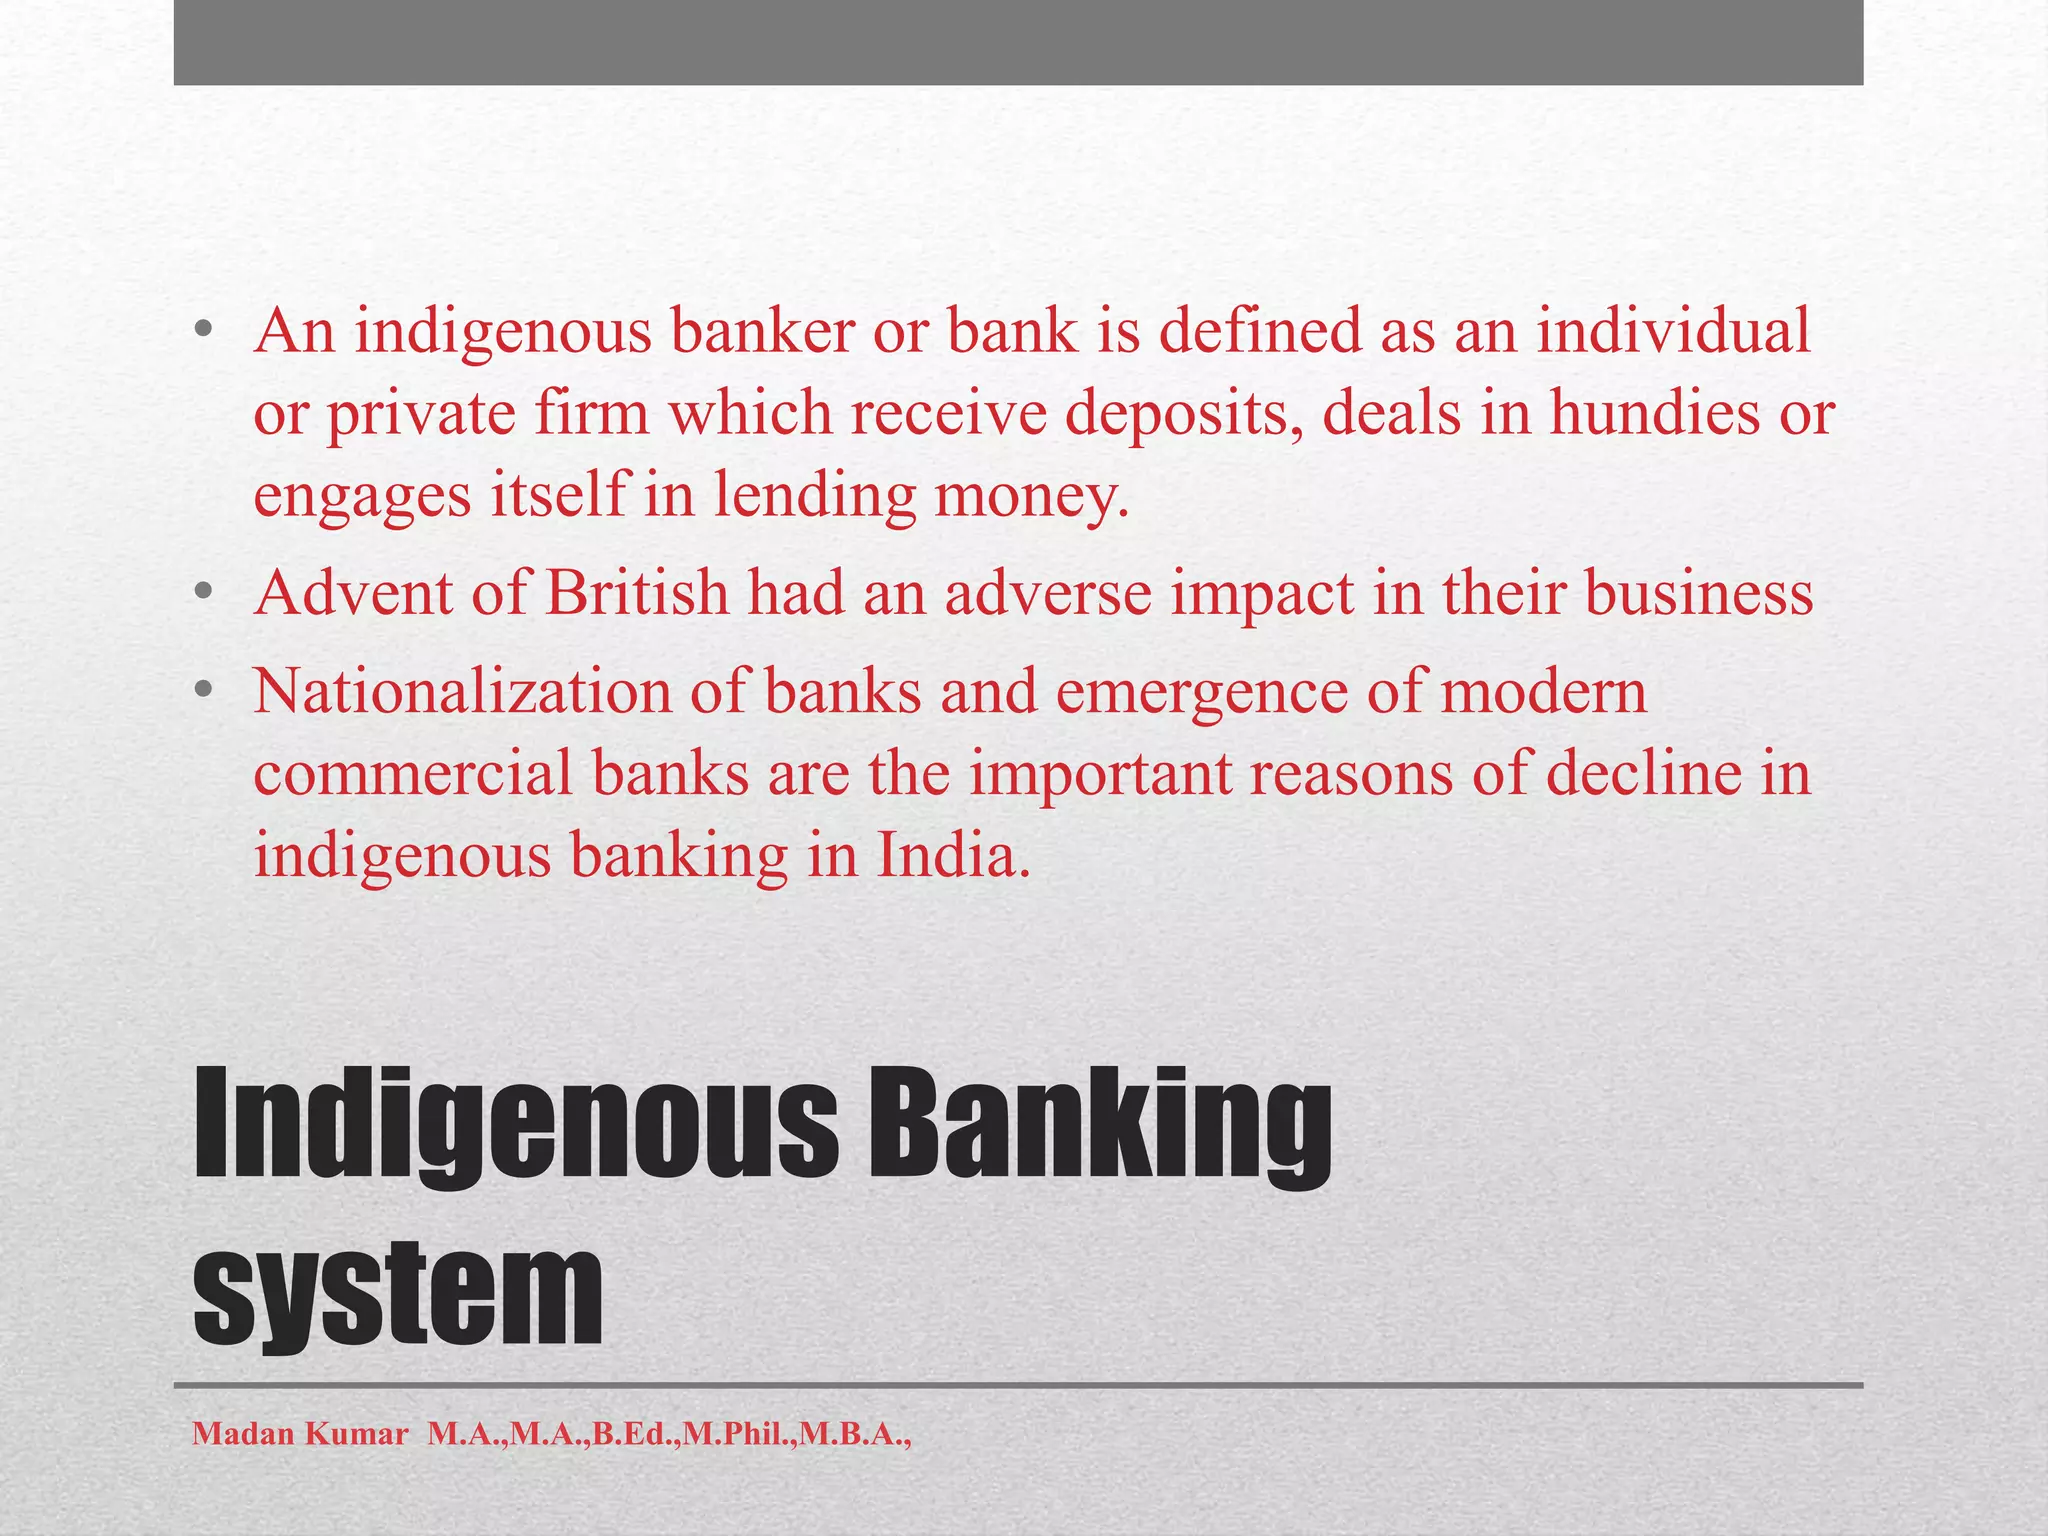 who are indigenous bankers